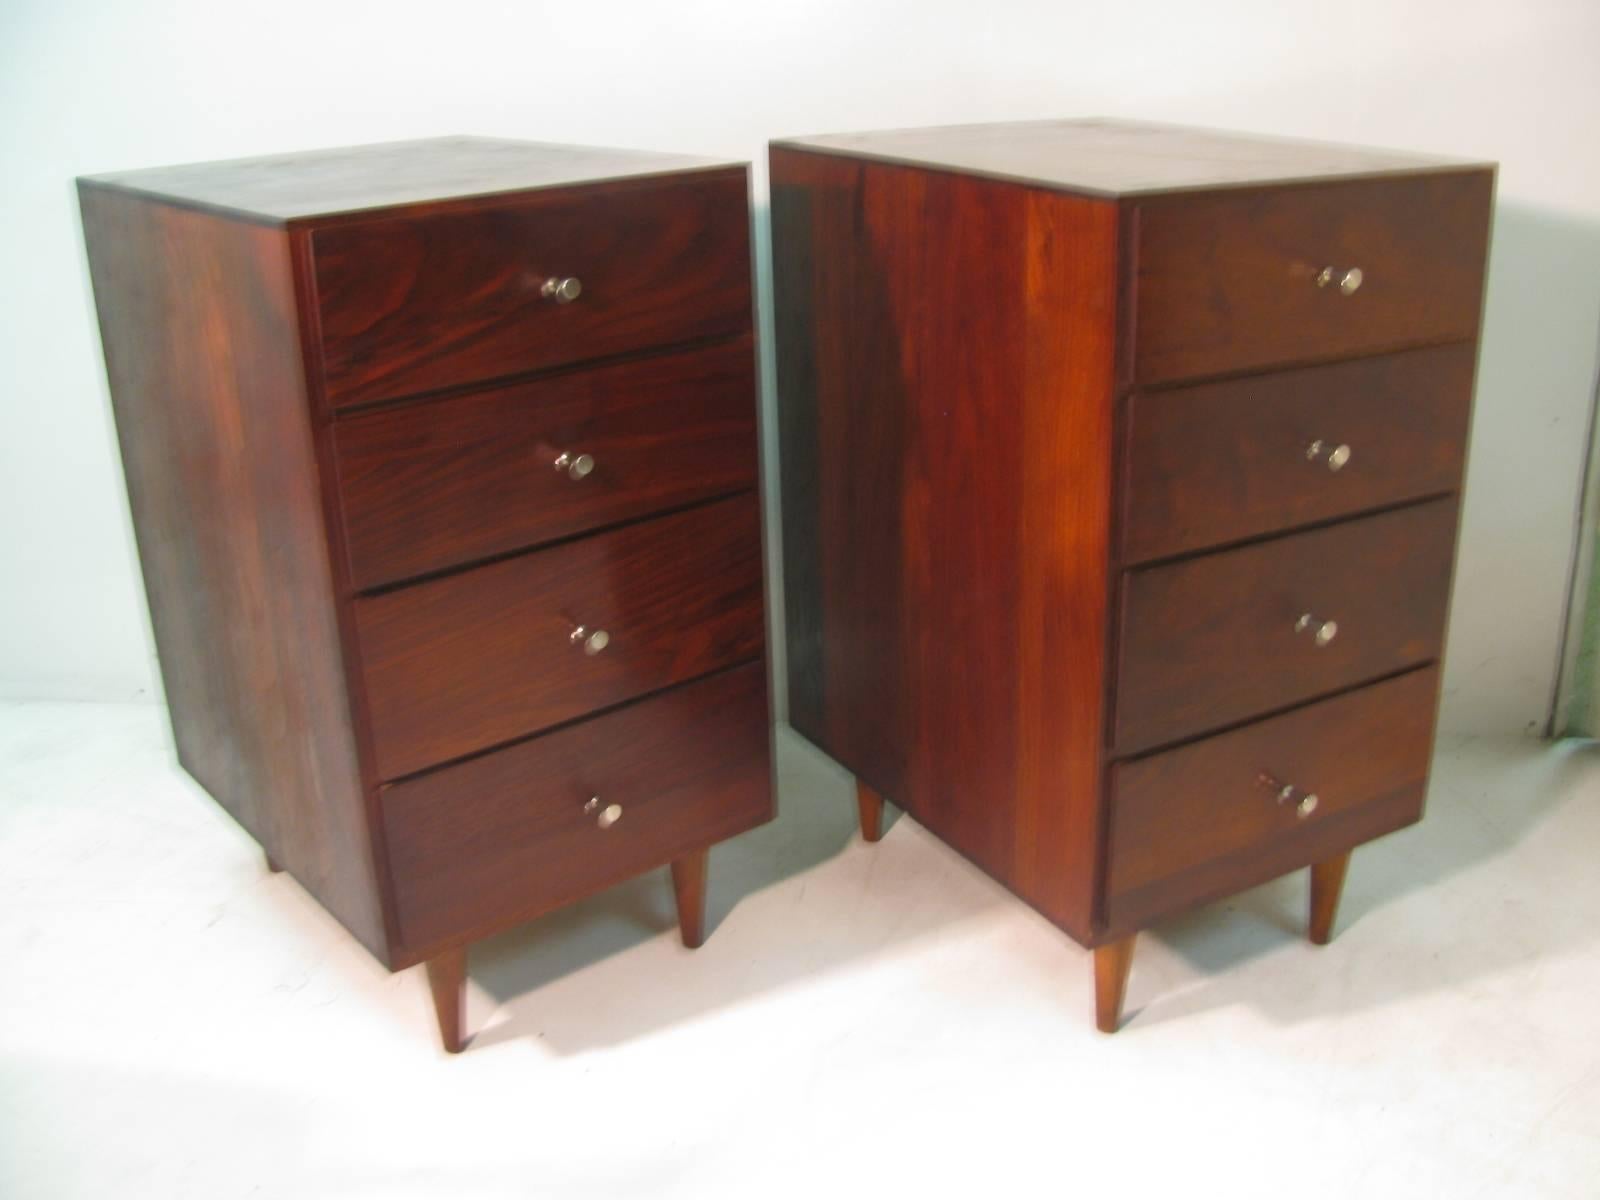 Simple and elegant pair of  three-drawer night tables in solid walnut with McCobb hour glass nickel pulls. Very tight and solid furniture. Masonite draw bottoms. Two drawers over one double size drawer on each table. Very good condition with a good